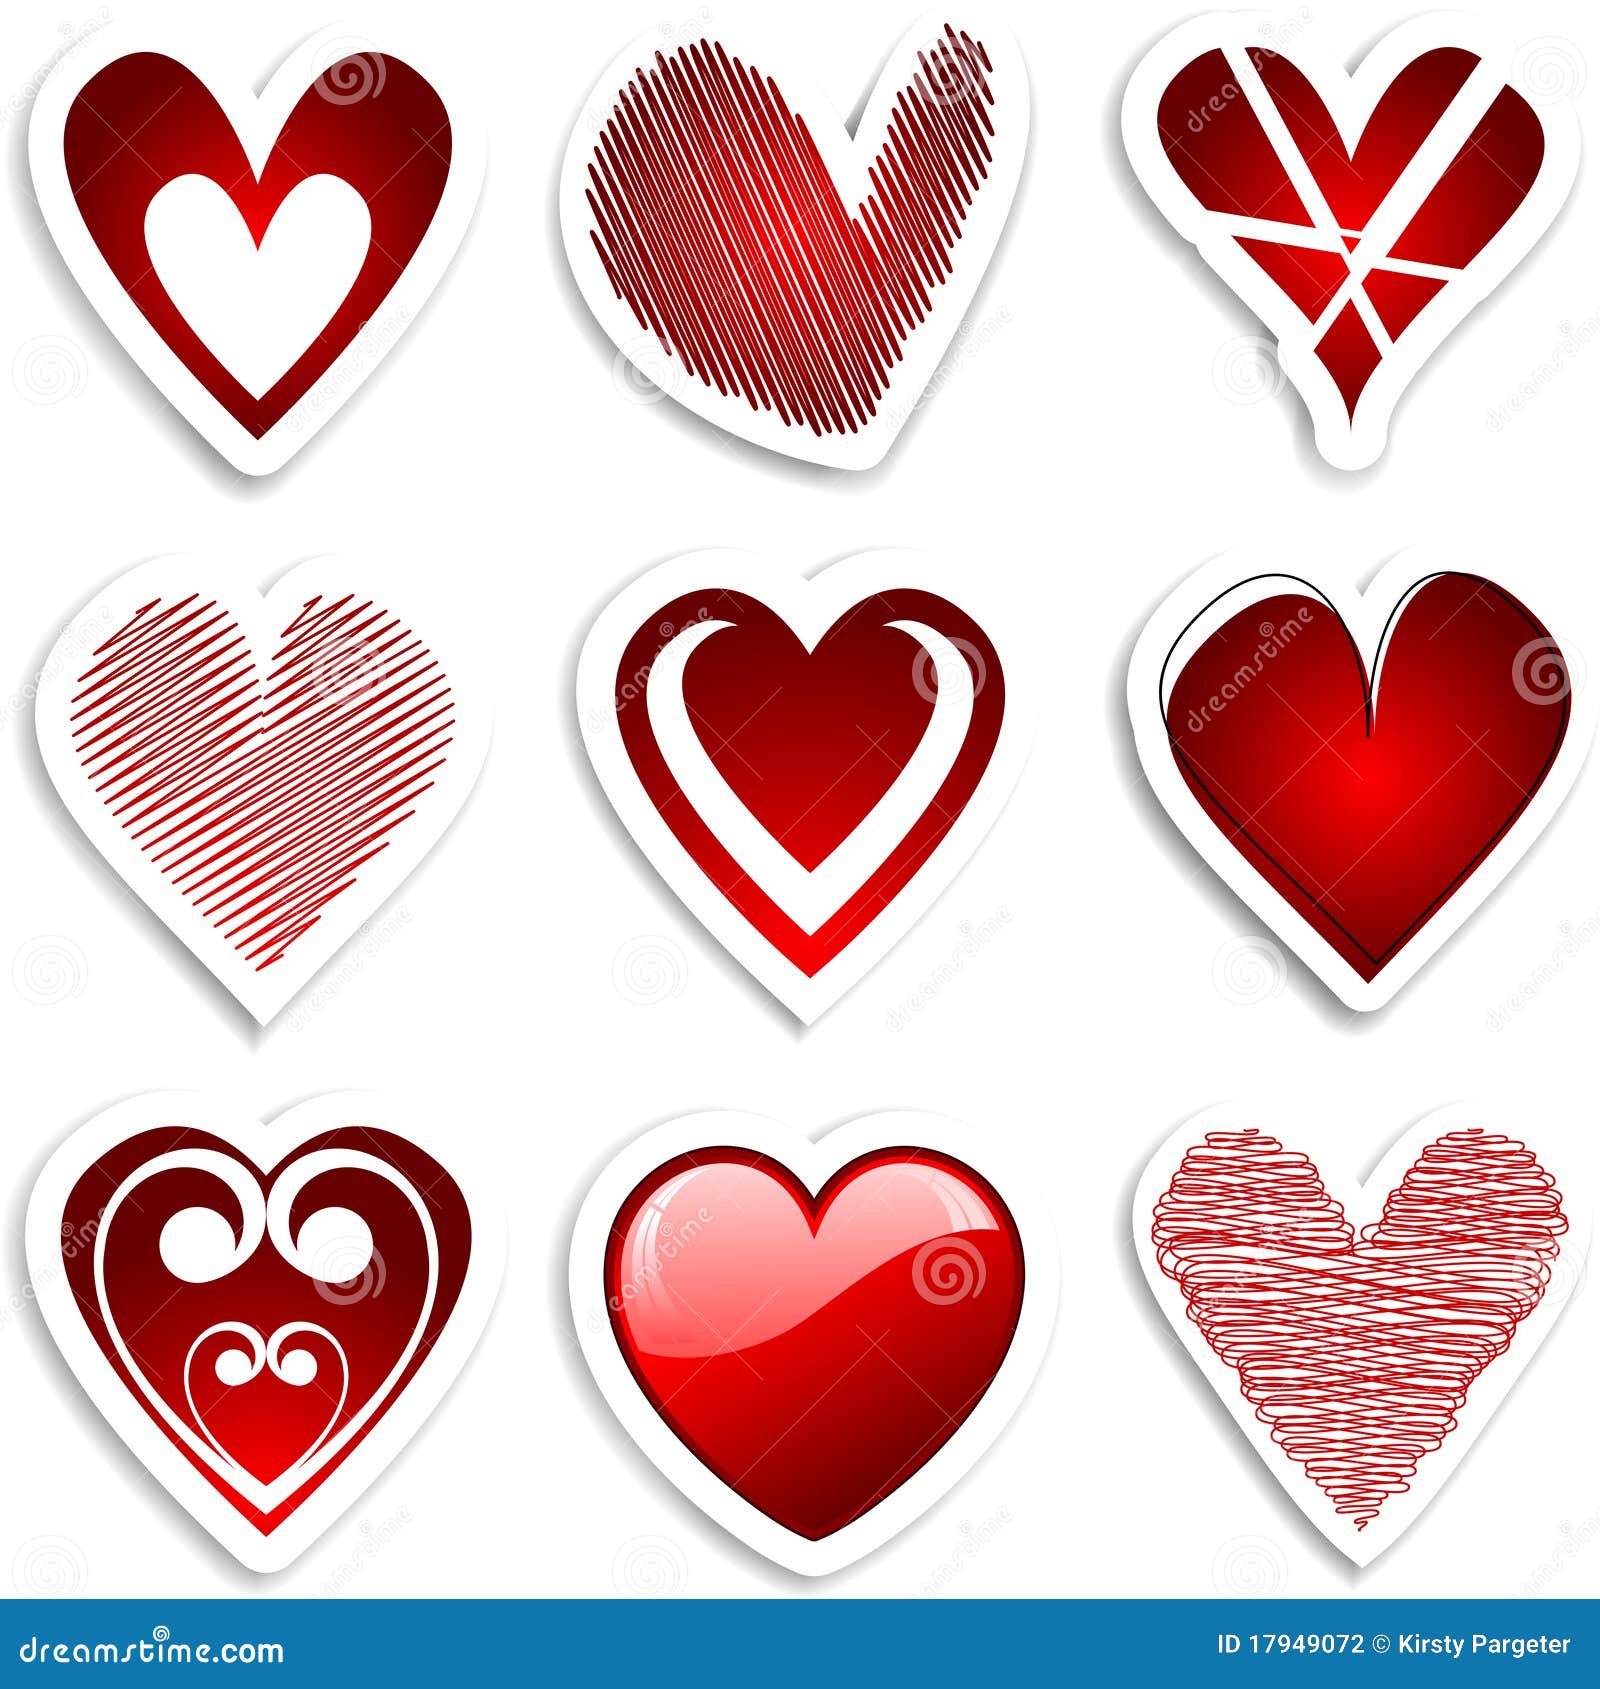 We Love Referrals Gold Heart Shape Stickers